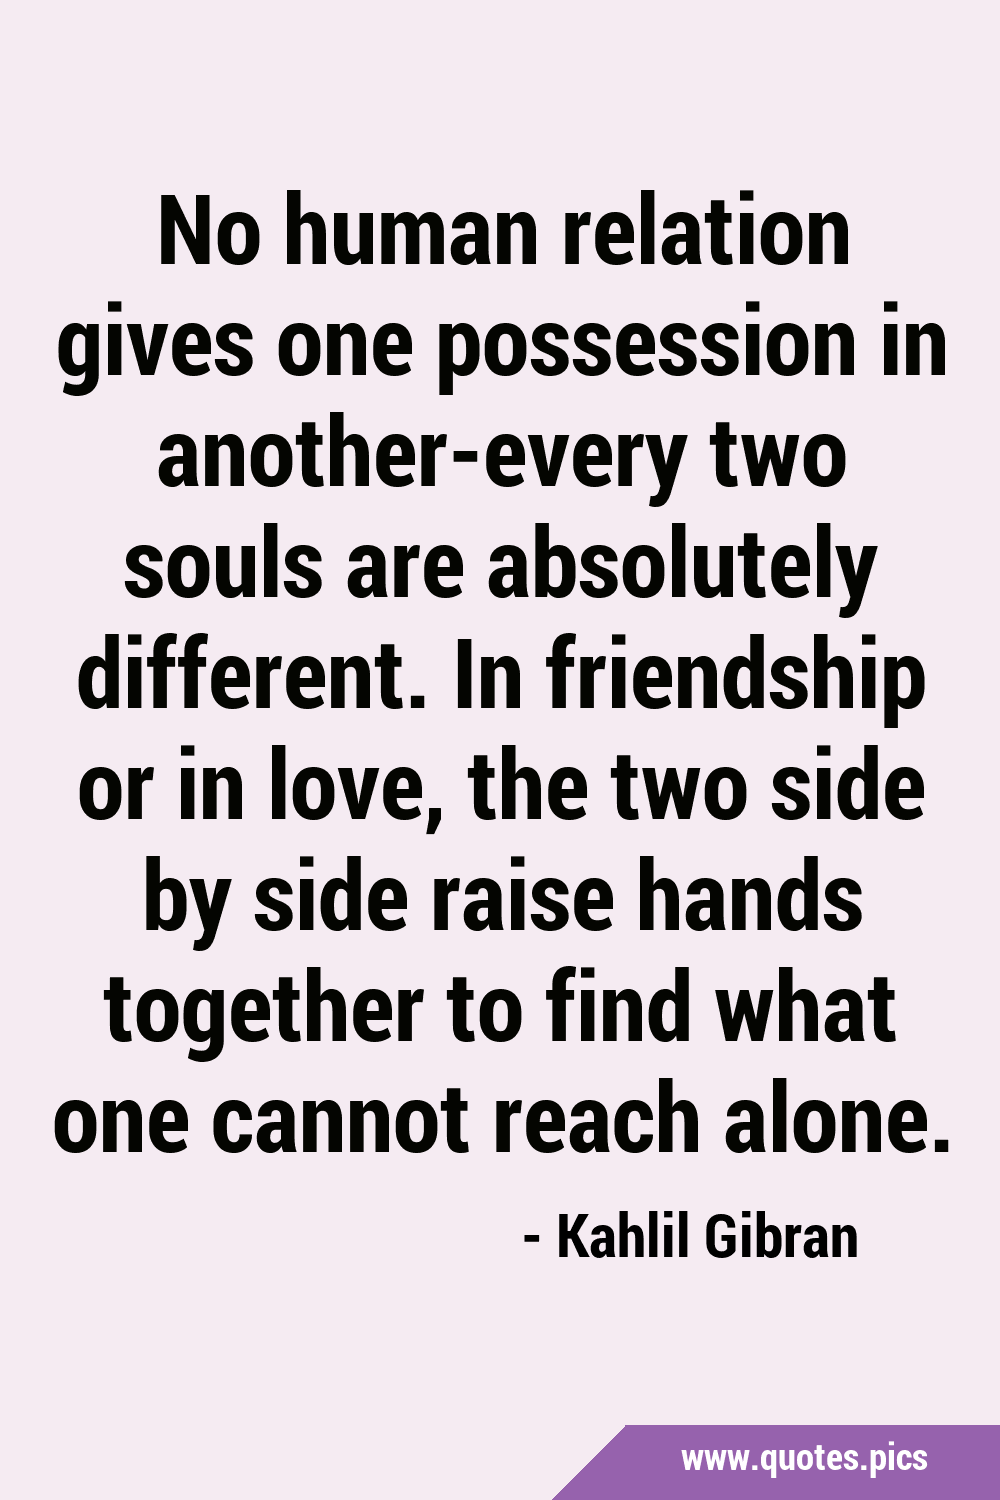 No Human Relation Gives One Possession In Another-Every Two Souls Are  Absolutely Different. In Friendship Or In Love, The Two Side By Side Raise  Hands